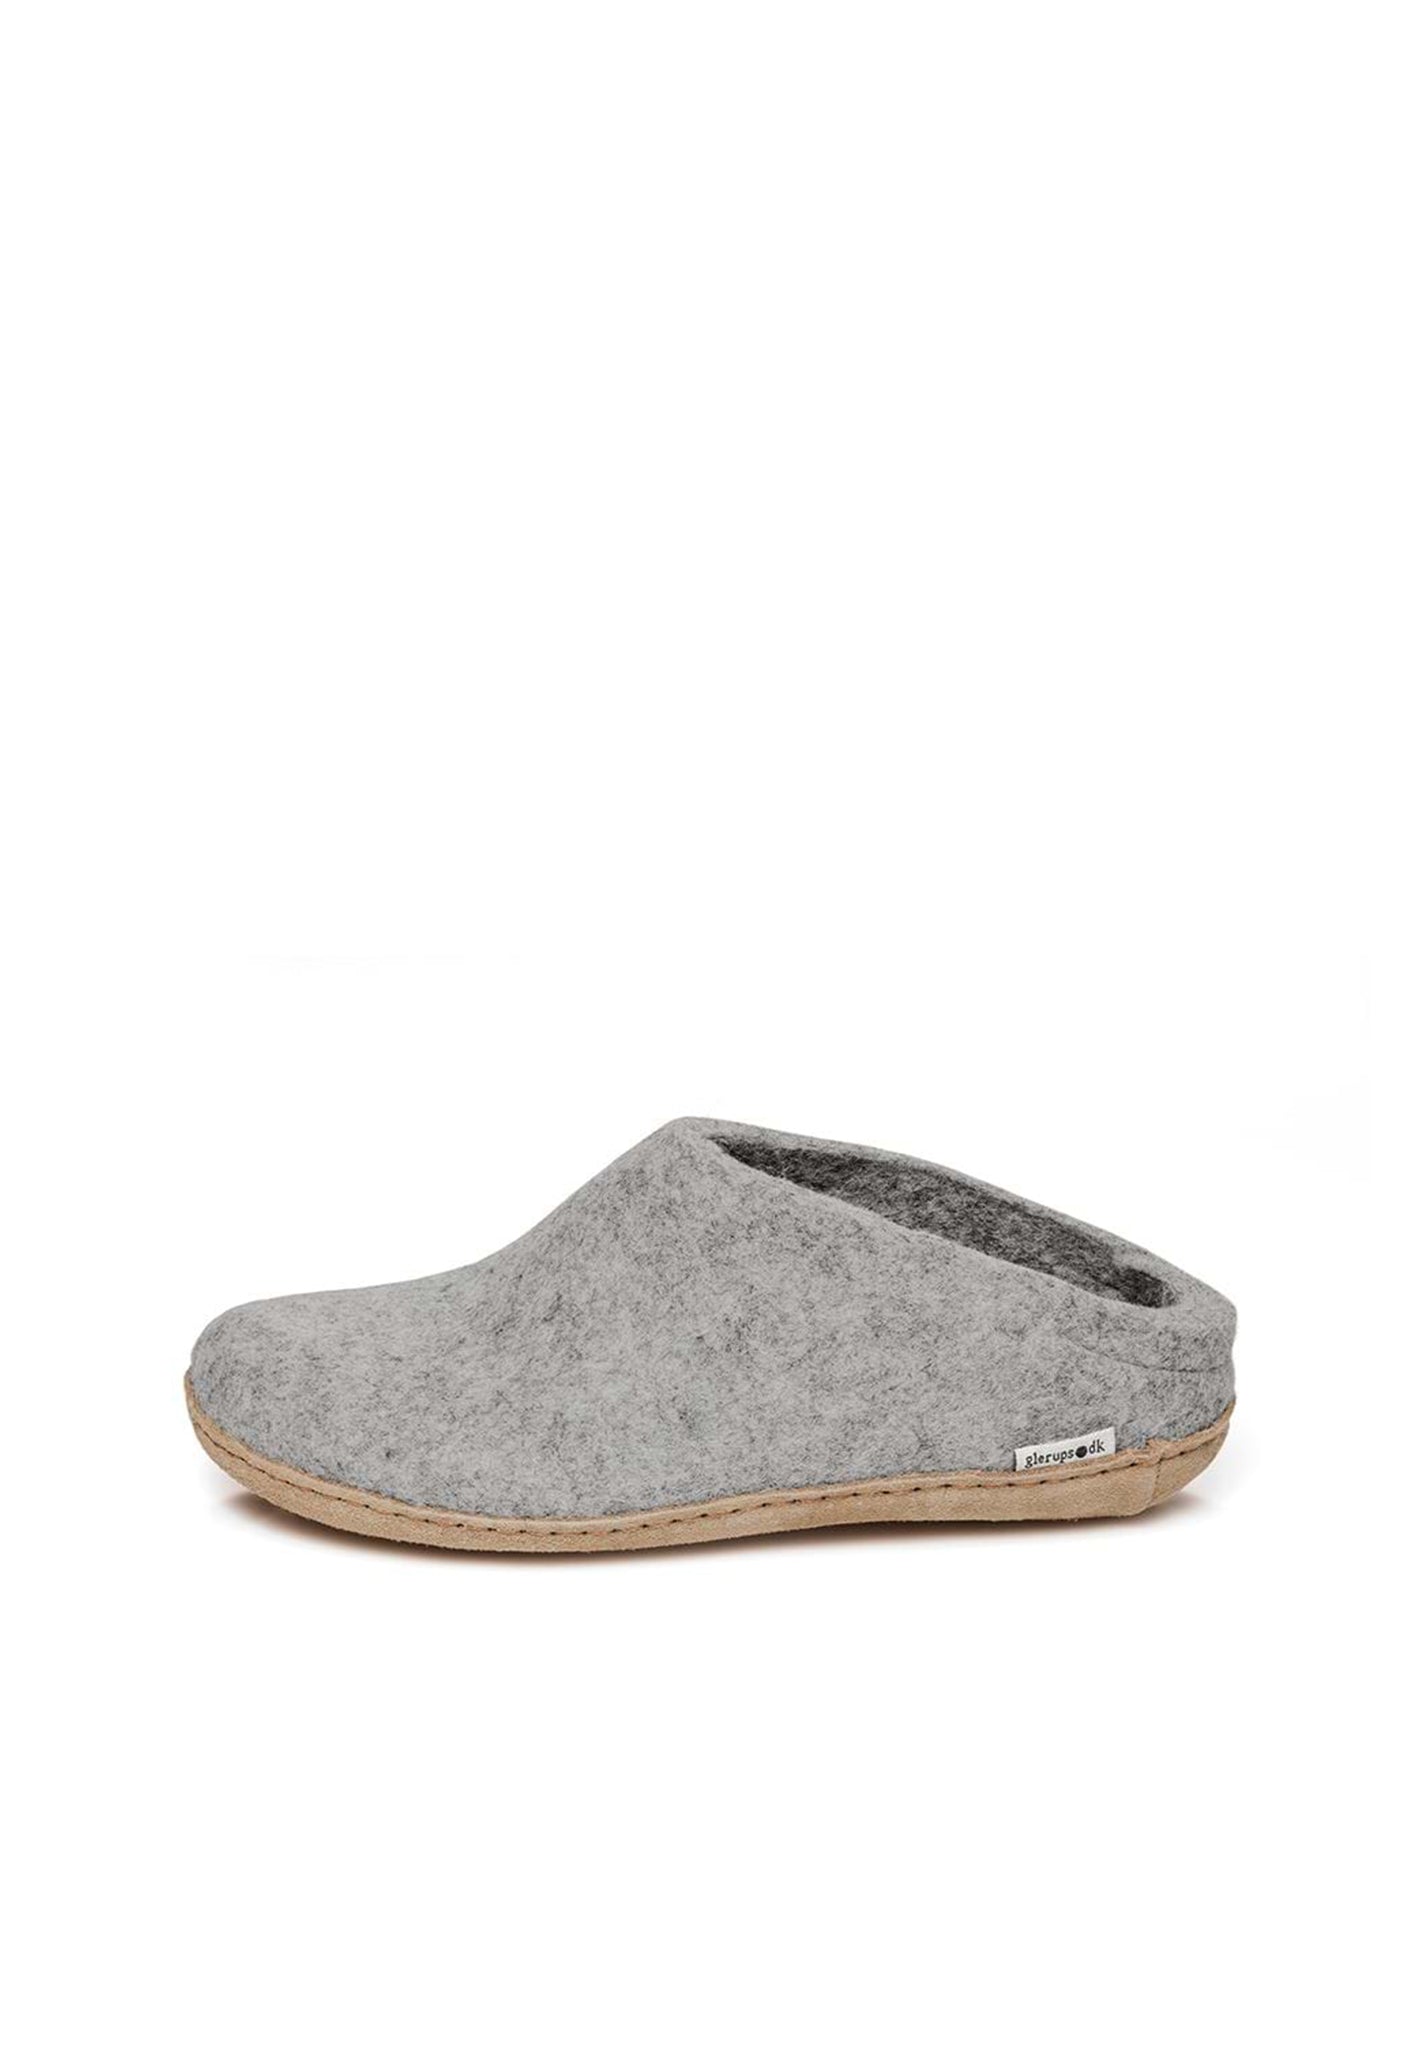 Glerups - Slip On with Leather Sole - Grey sold by Angel Divine